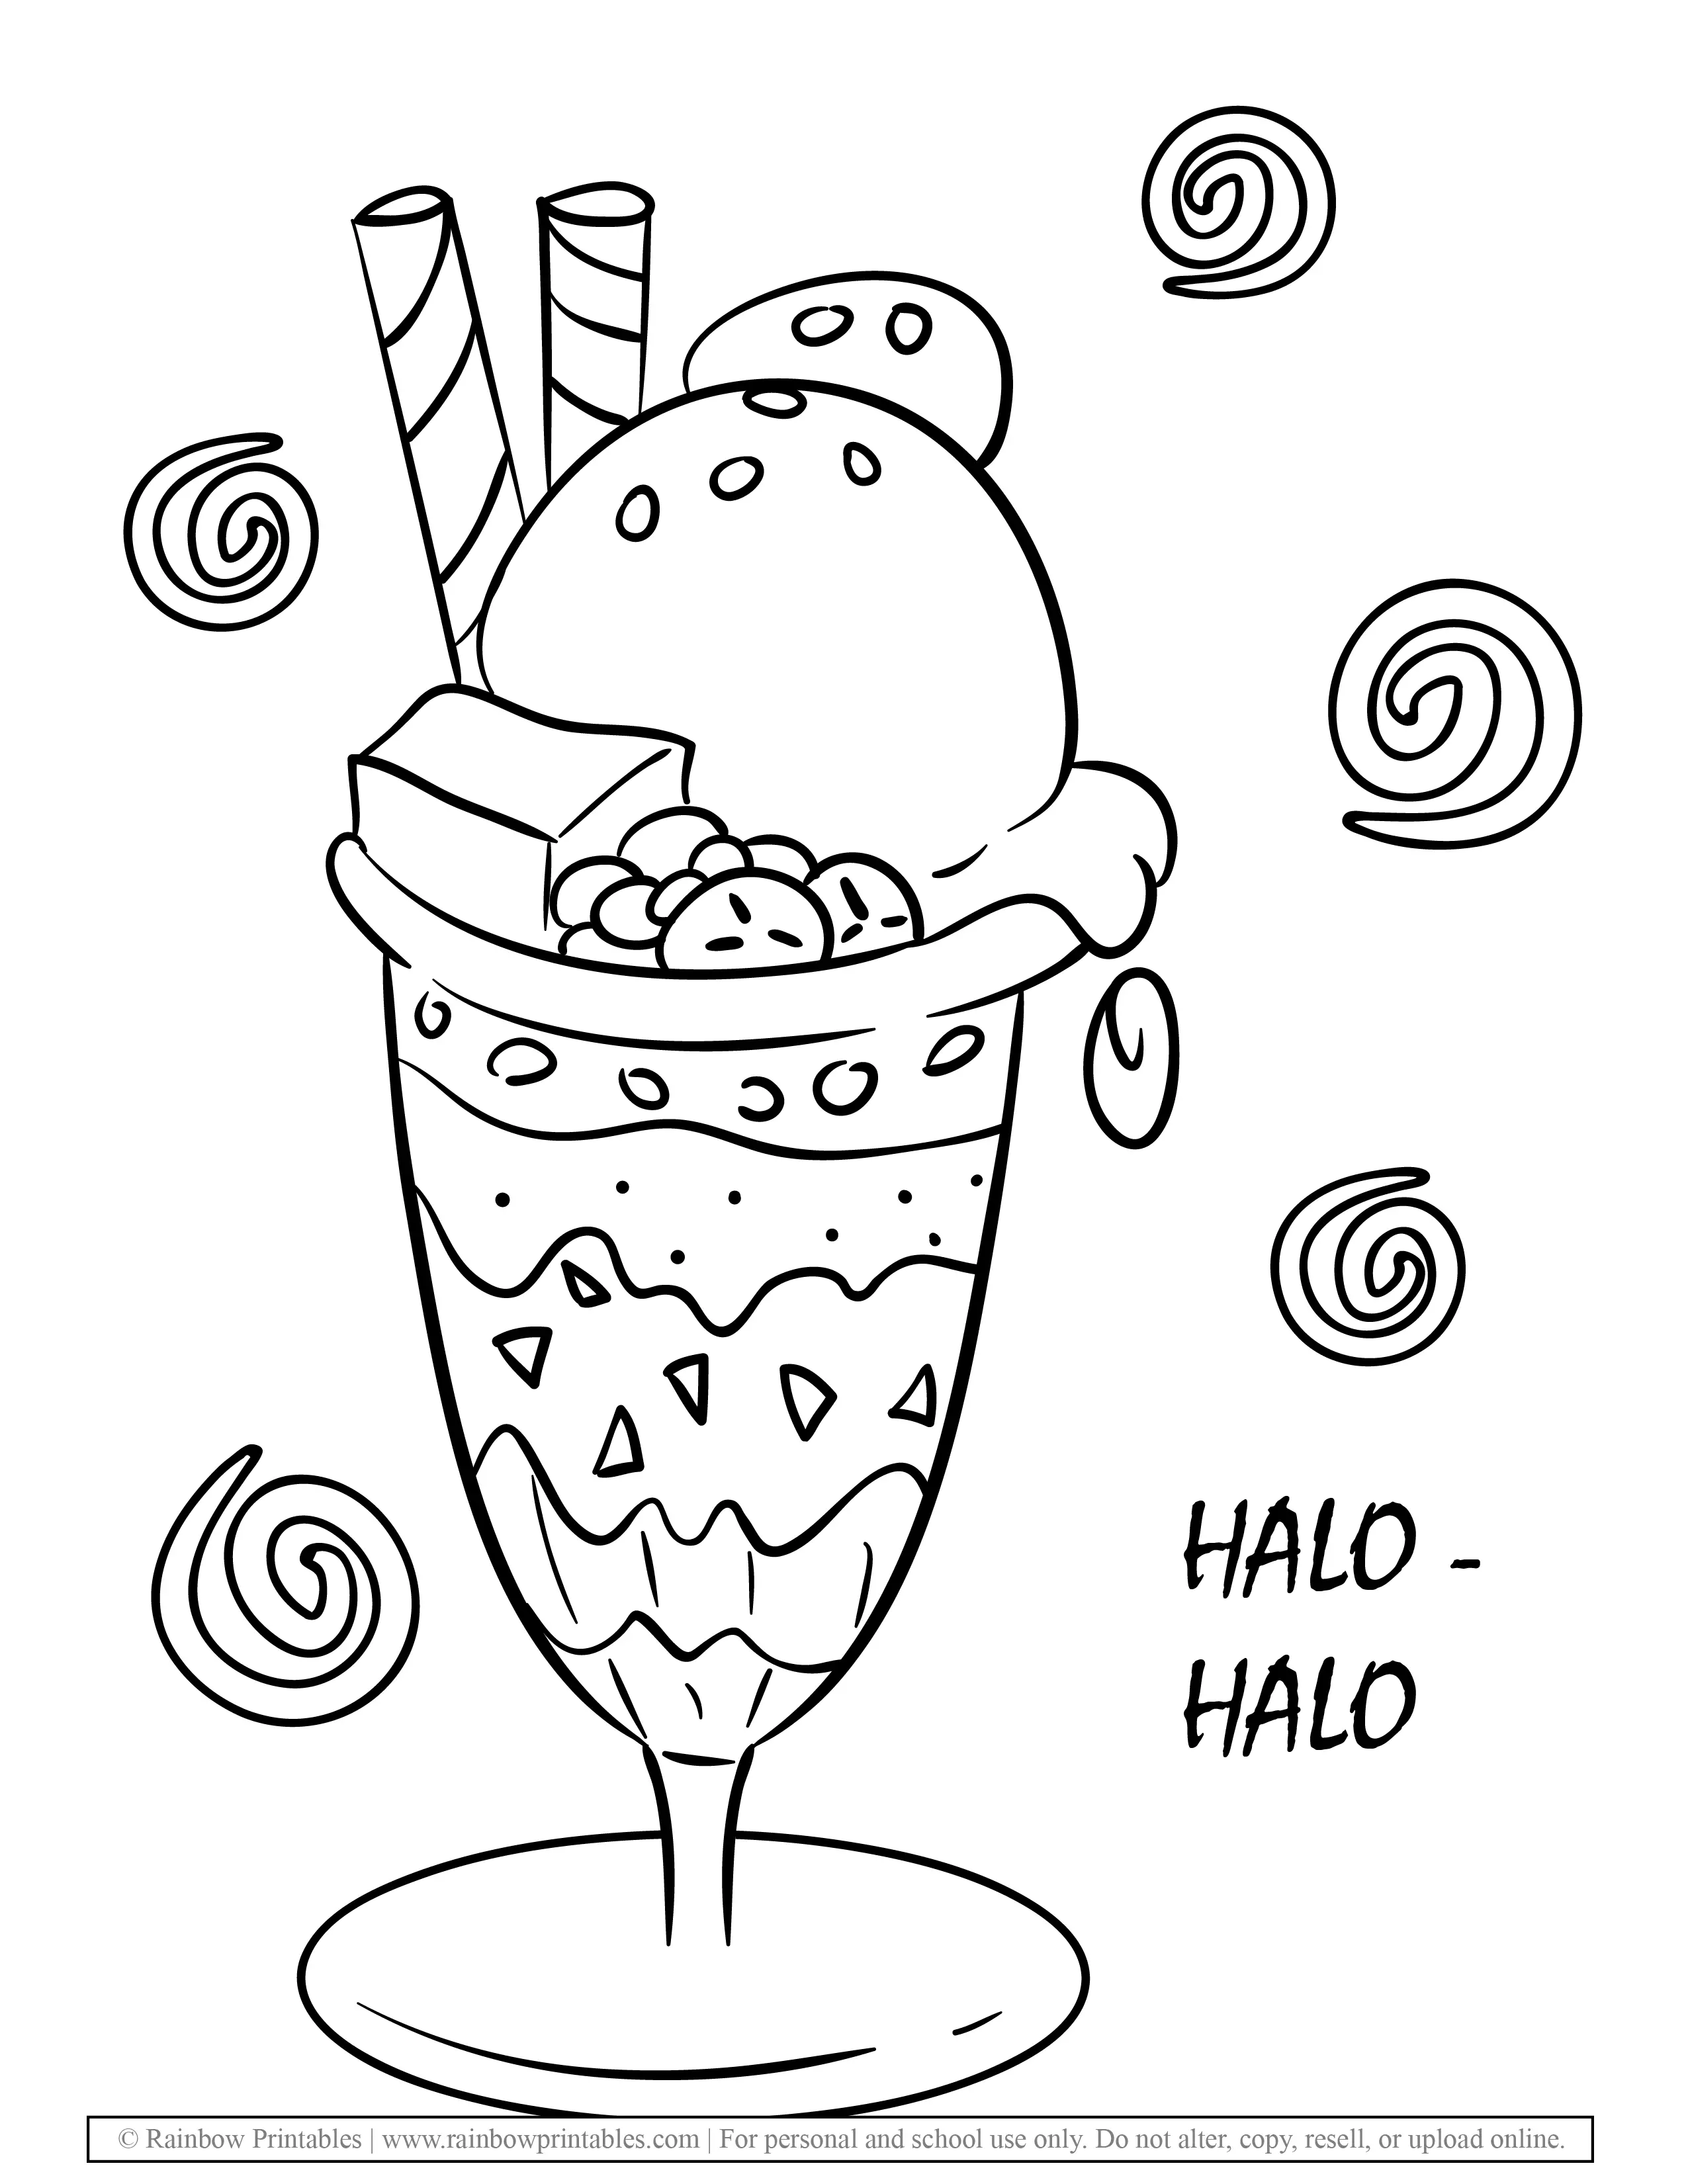 HaLO HALO Phillipines Dessert Mixed Sundae Exotic SUMMER ICE CREAM UBE TREAT Coloring page for kids